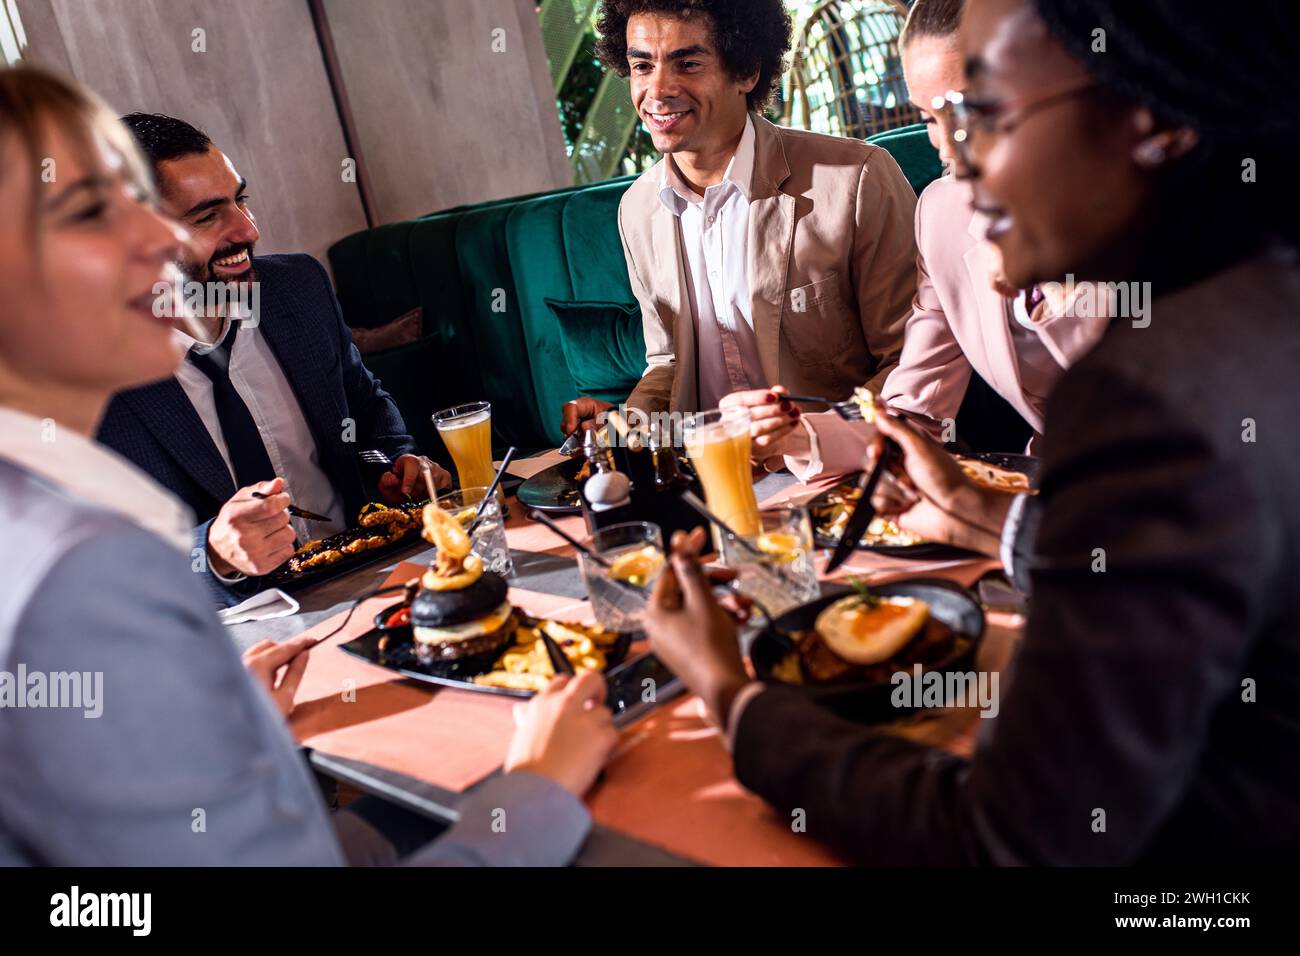 Group of business people in restaurant at lunch. Stock Photo